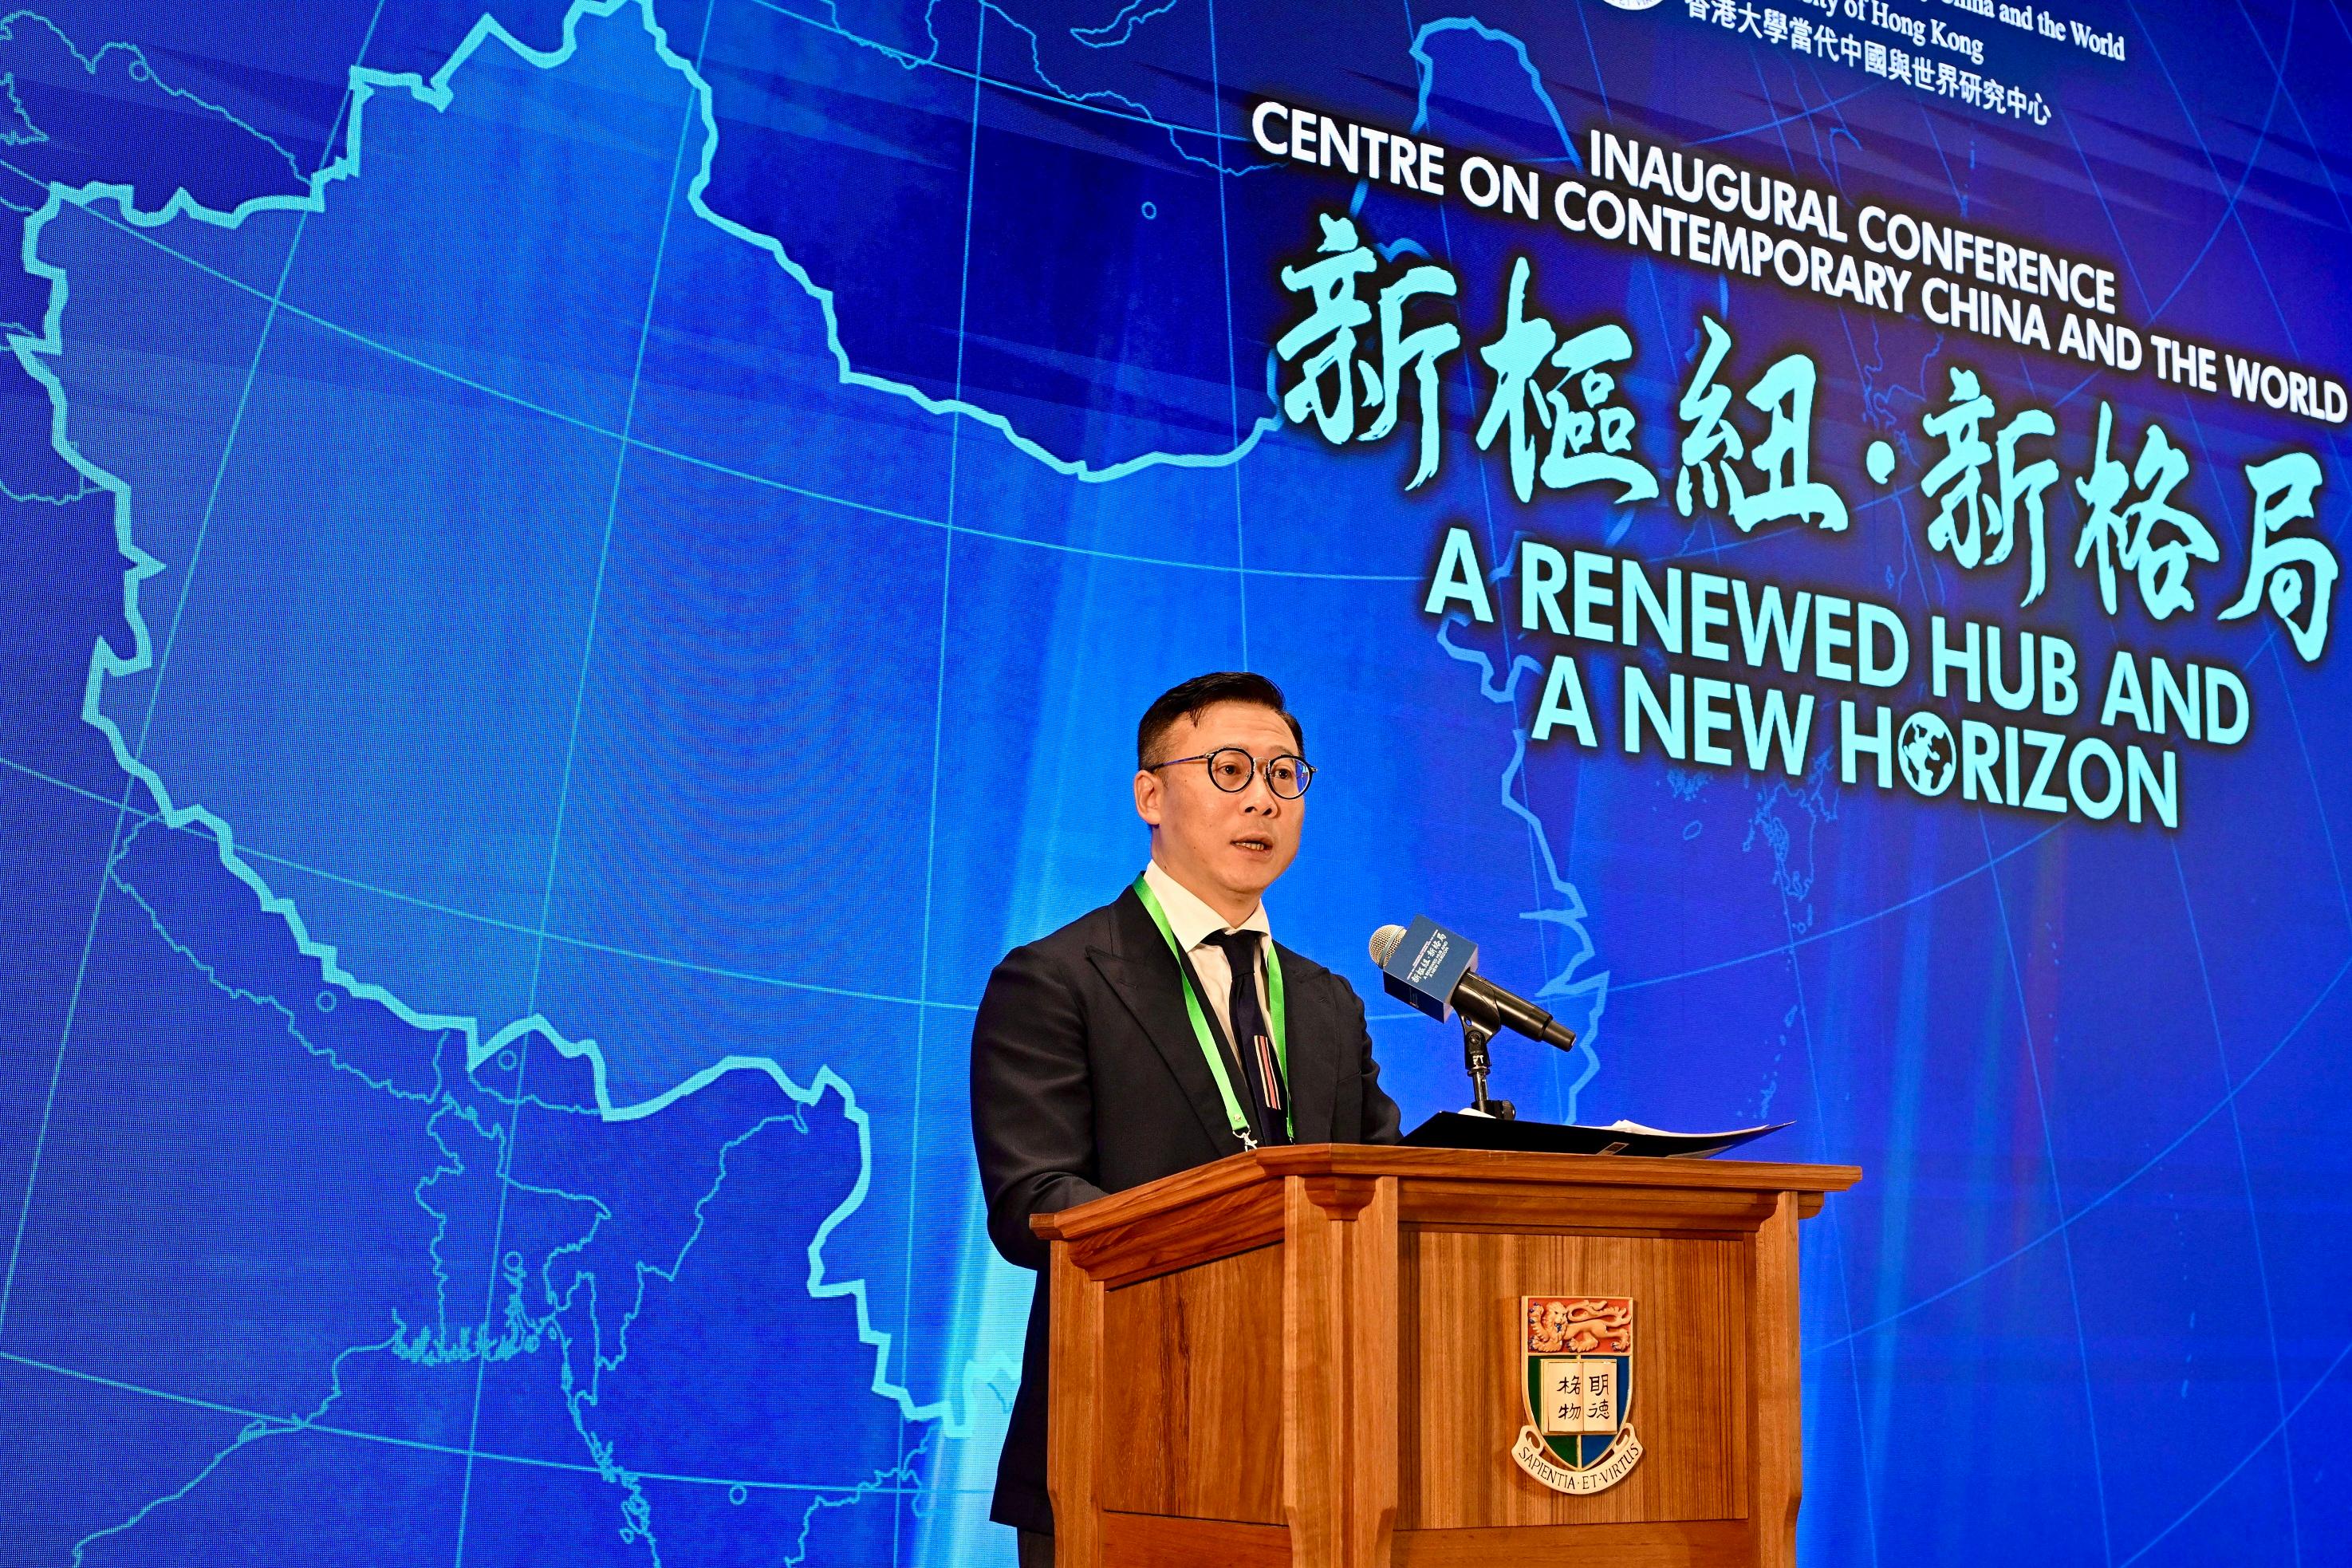 The Deputy Secretary for Justice, Mr Cheung Kwok-kwan, delivers a speech at the opening ceremony of the Inaugural Conference of the Centre on Contemporary China and the World of the University of Hong Kong today (December 15).



